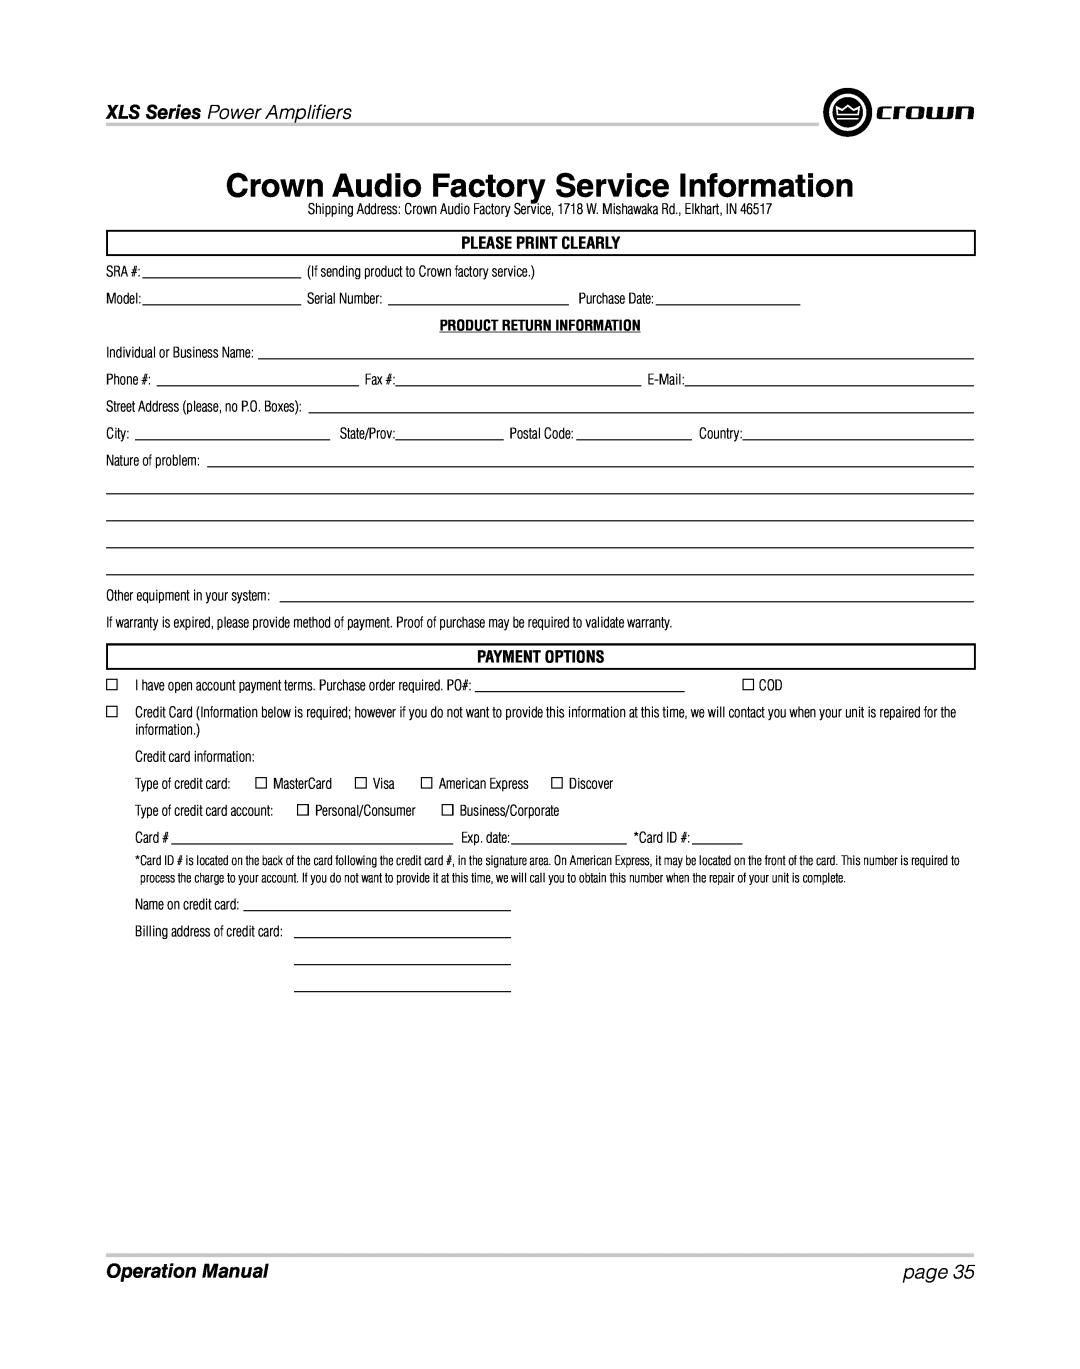 Crown XLS 1000 Crown Audio Factory Service Information, Please Print Clearly, Payment Options, XLS Series Power Ampliﬁ ers 